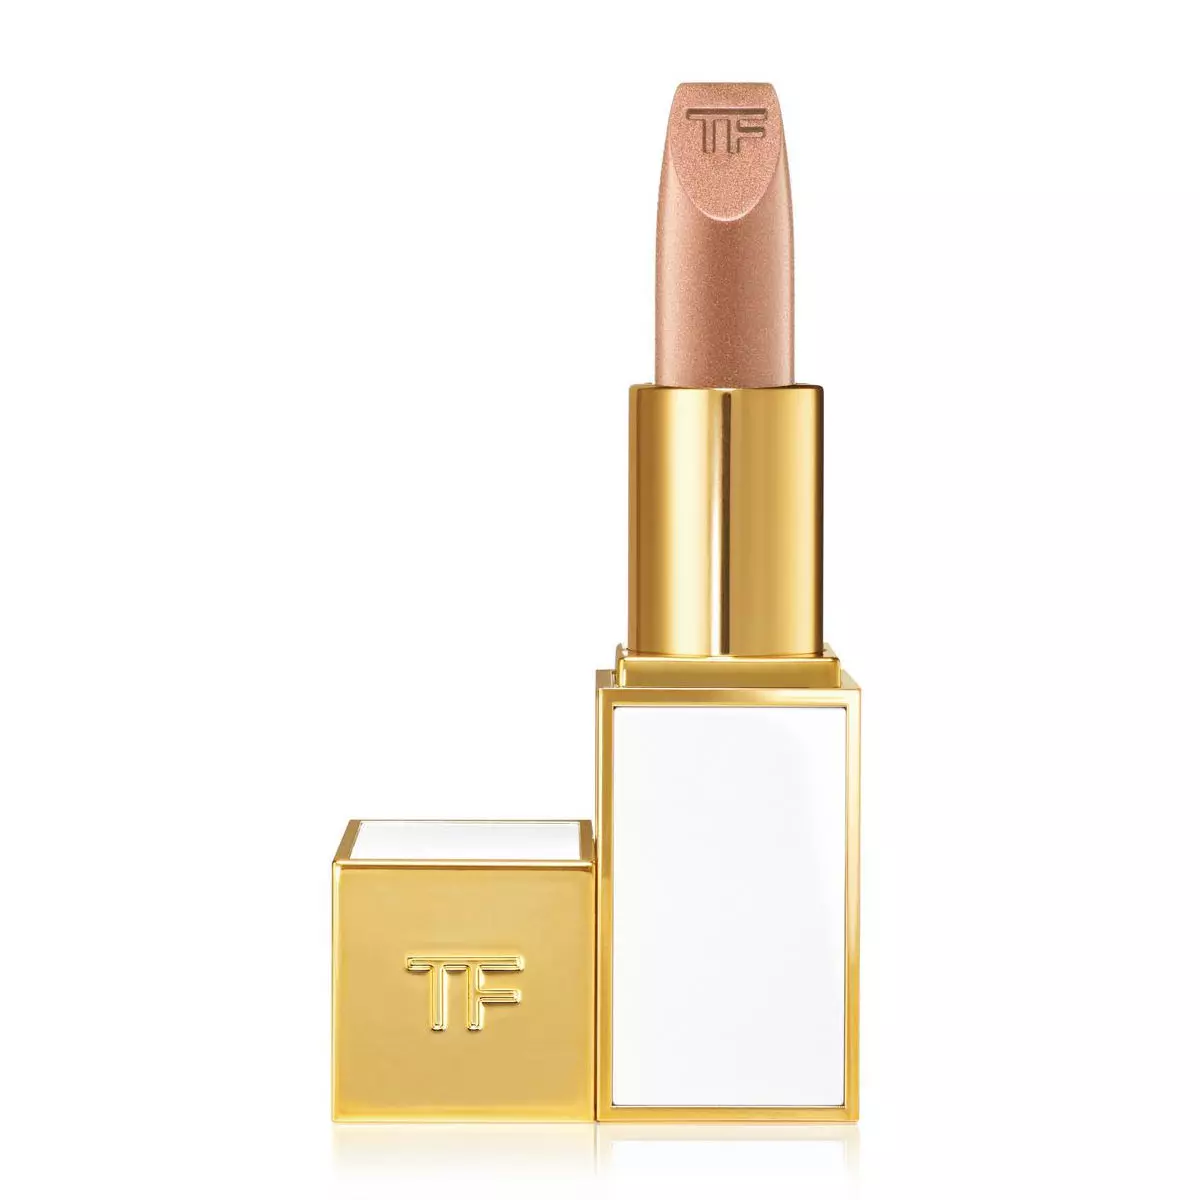 Tom Ford Soleil Lip Foil Spanish Flame 02  - Best deals on Tom  Ford cosmetics